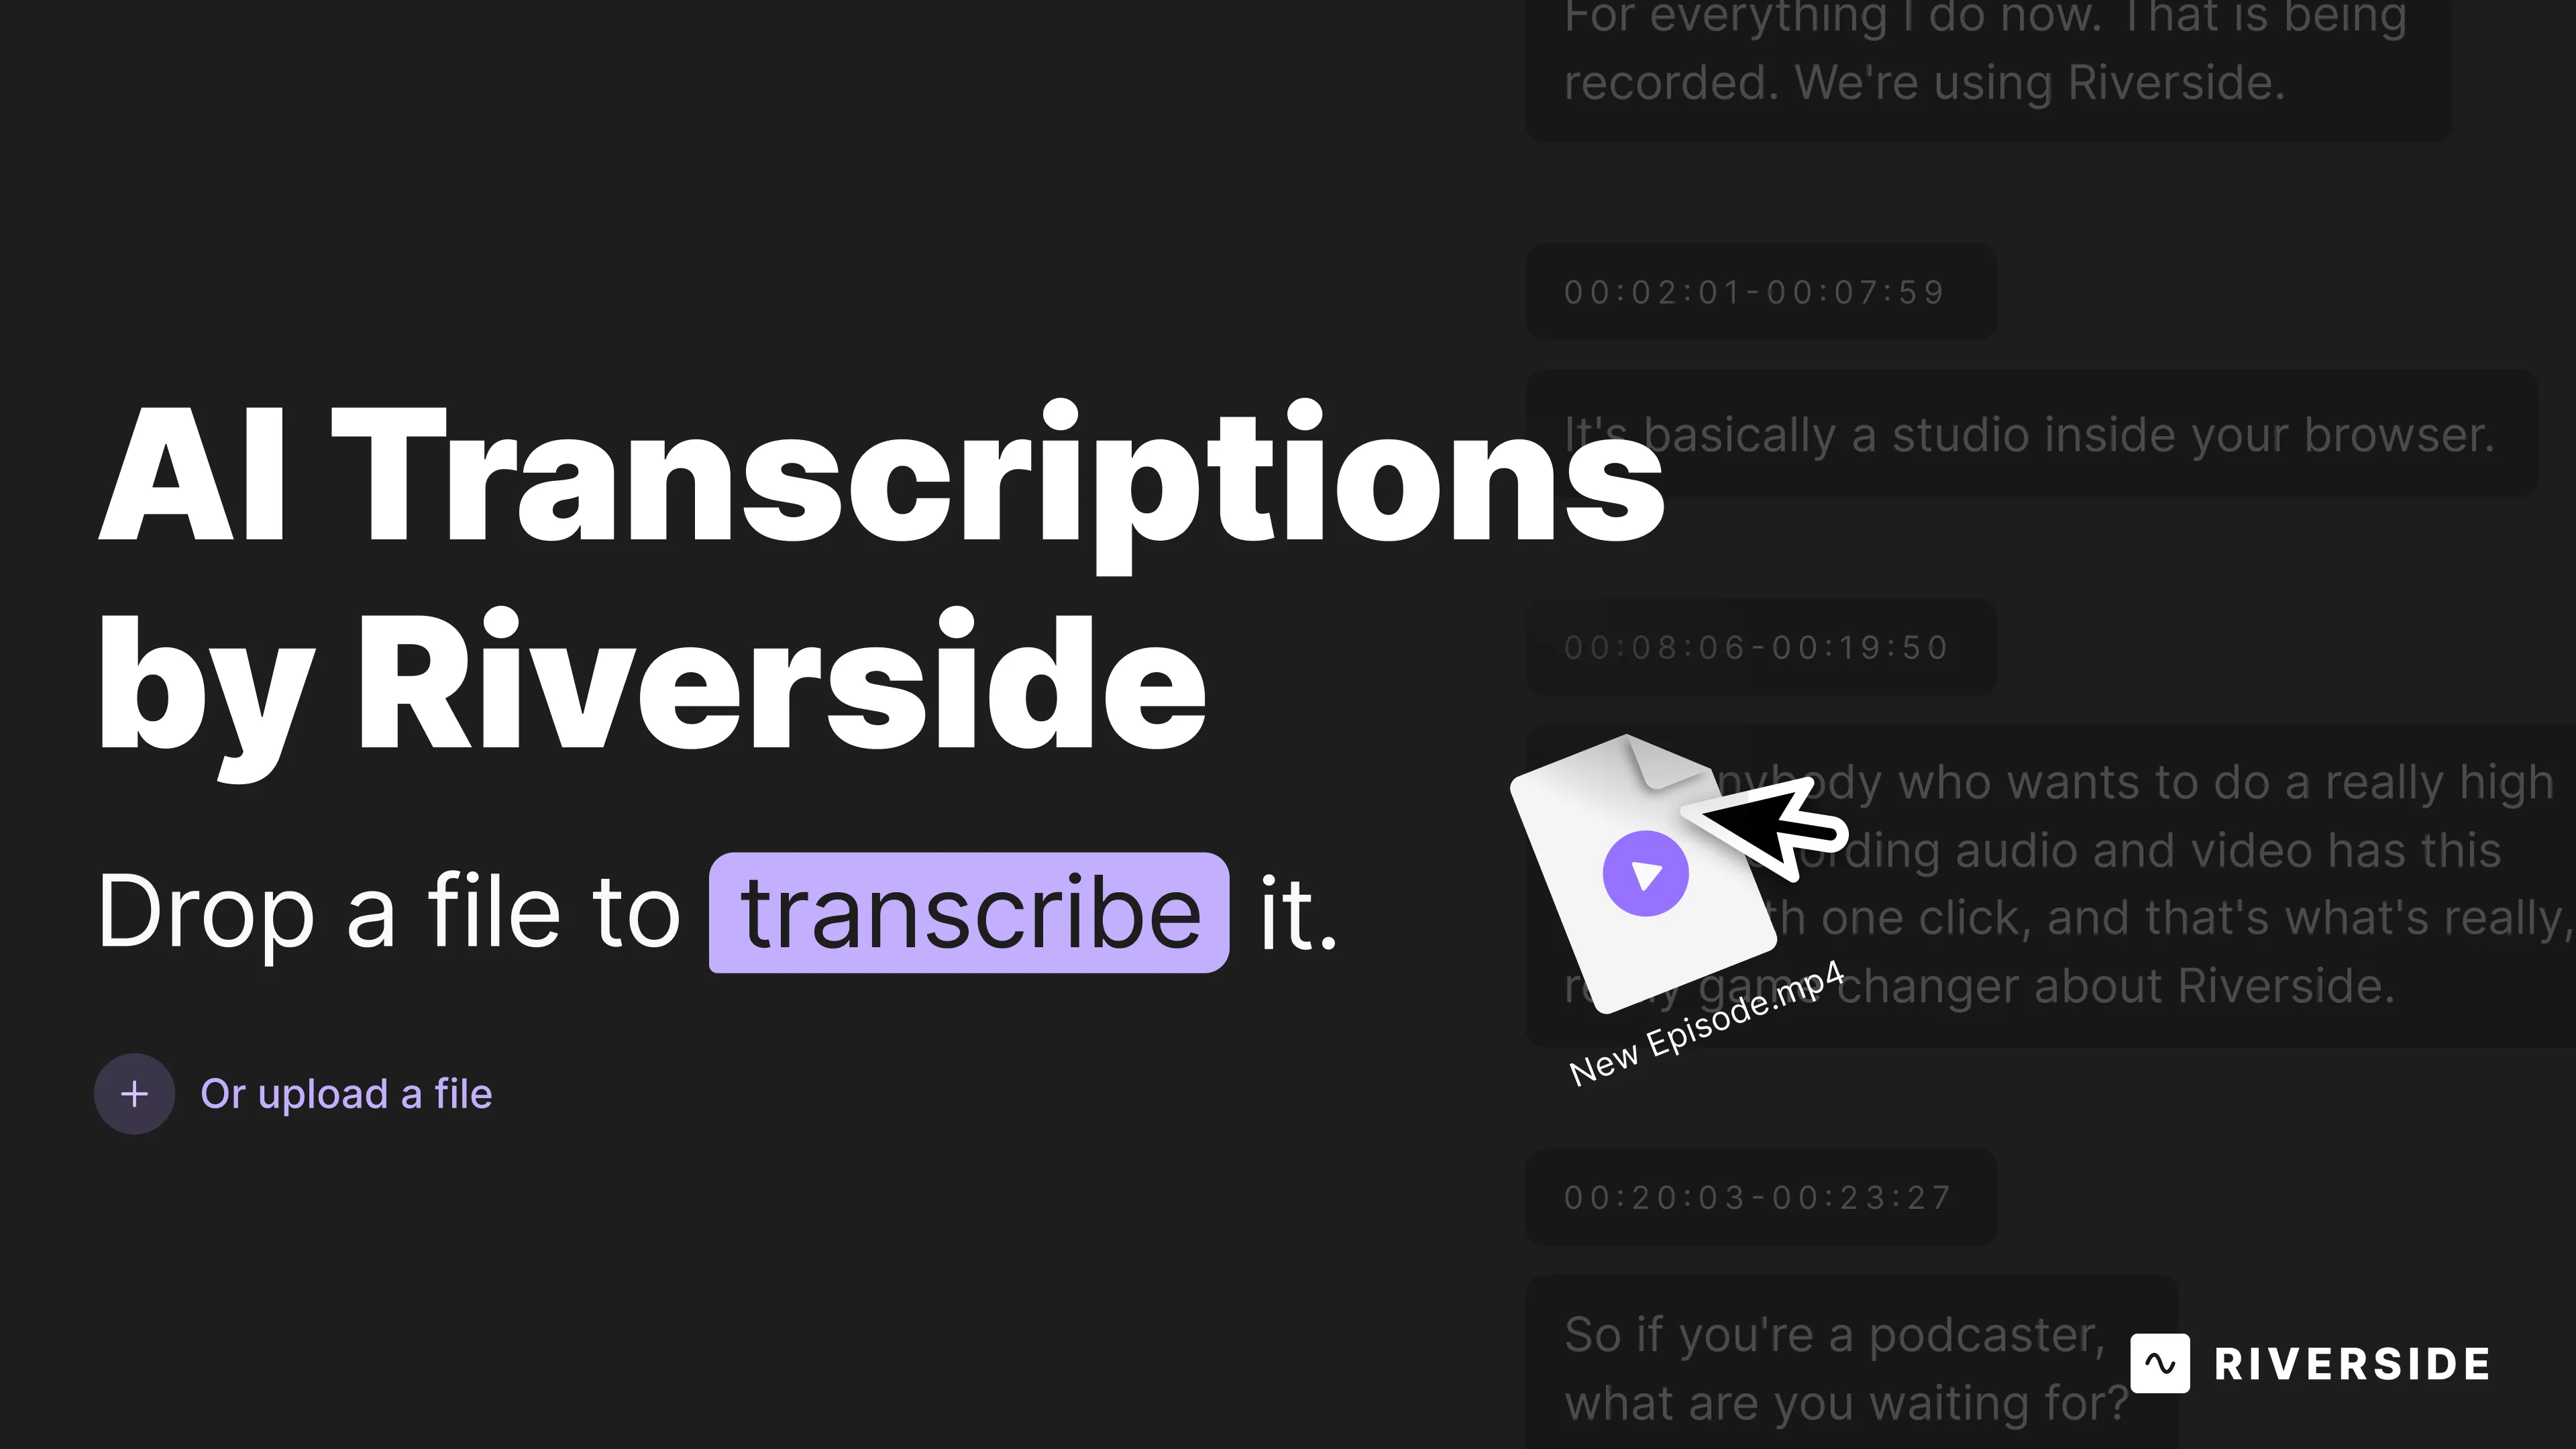 Riverside Transcriptions - A free tool for generating transcriptions for audio and video files